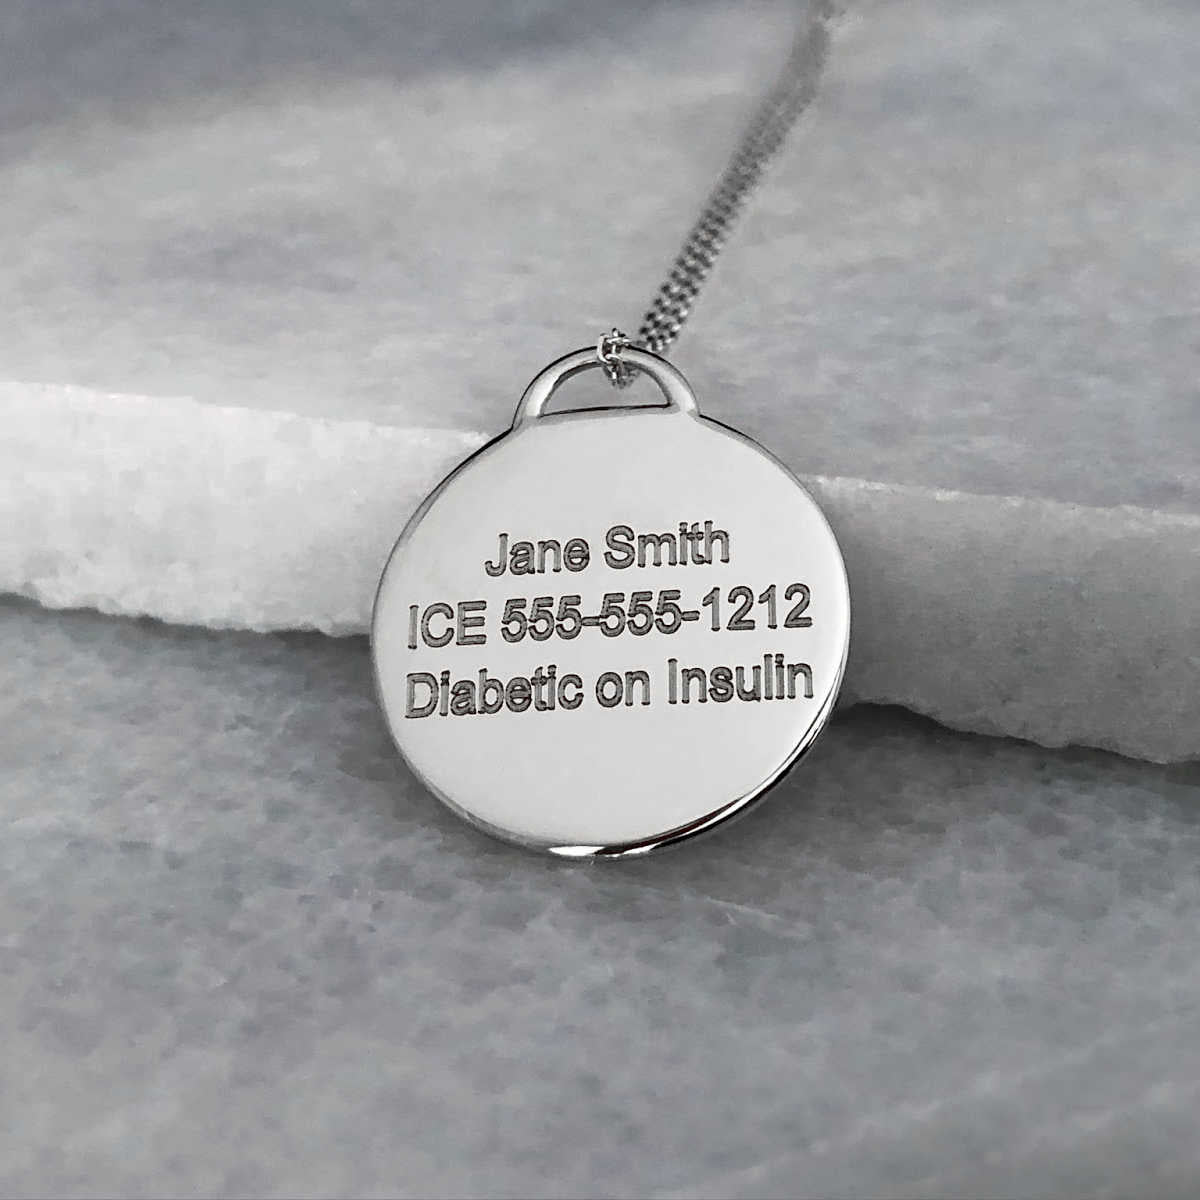 White Gold Medical Alert Necklace with Diamond & Ruby Pendant